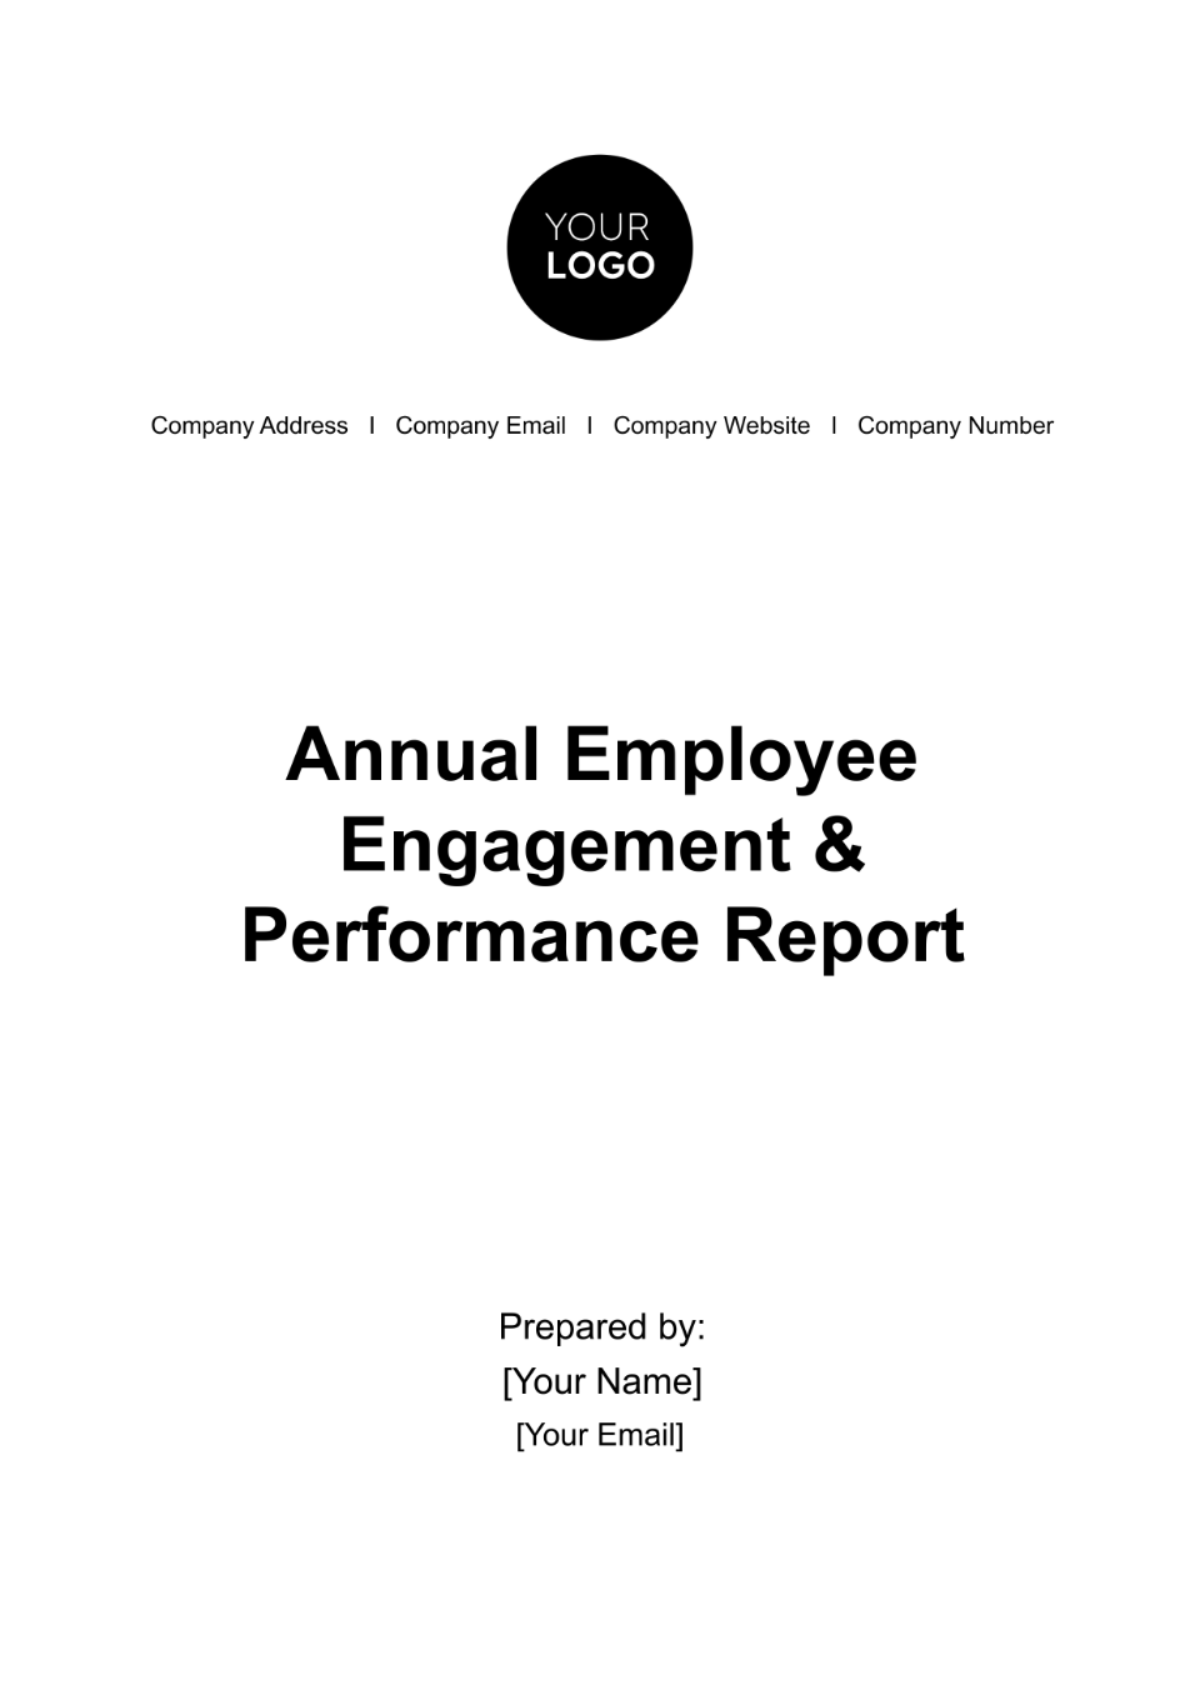 Free Annual Employee Engagement & Performance Report HR Template